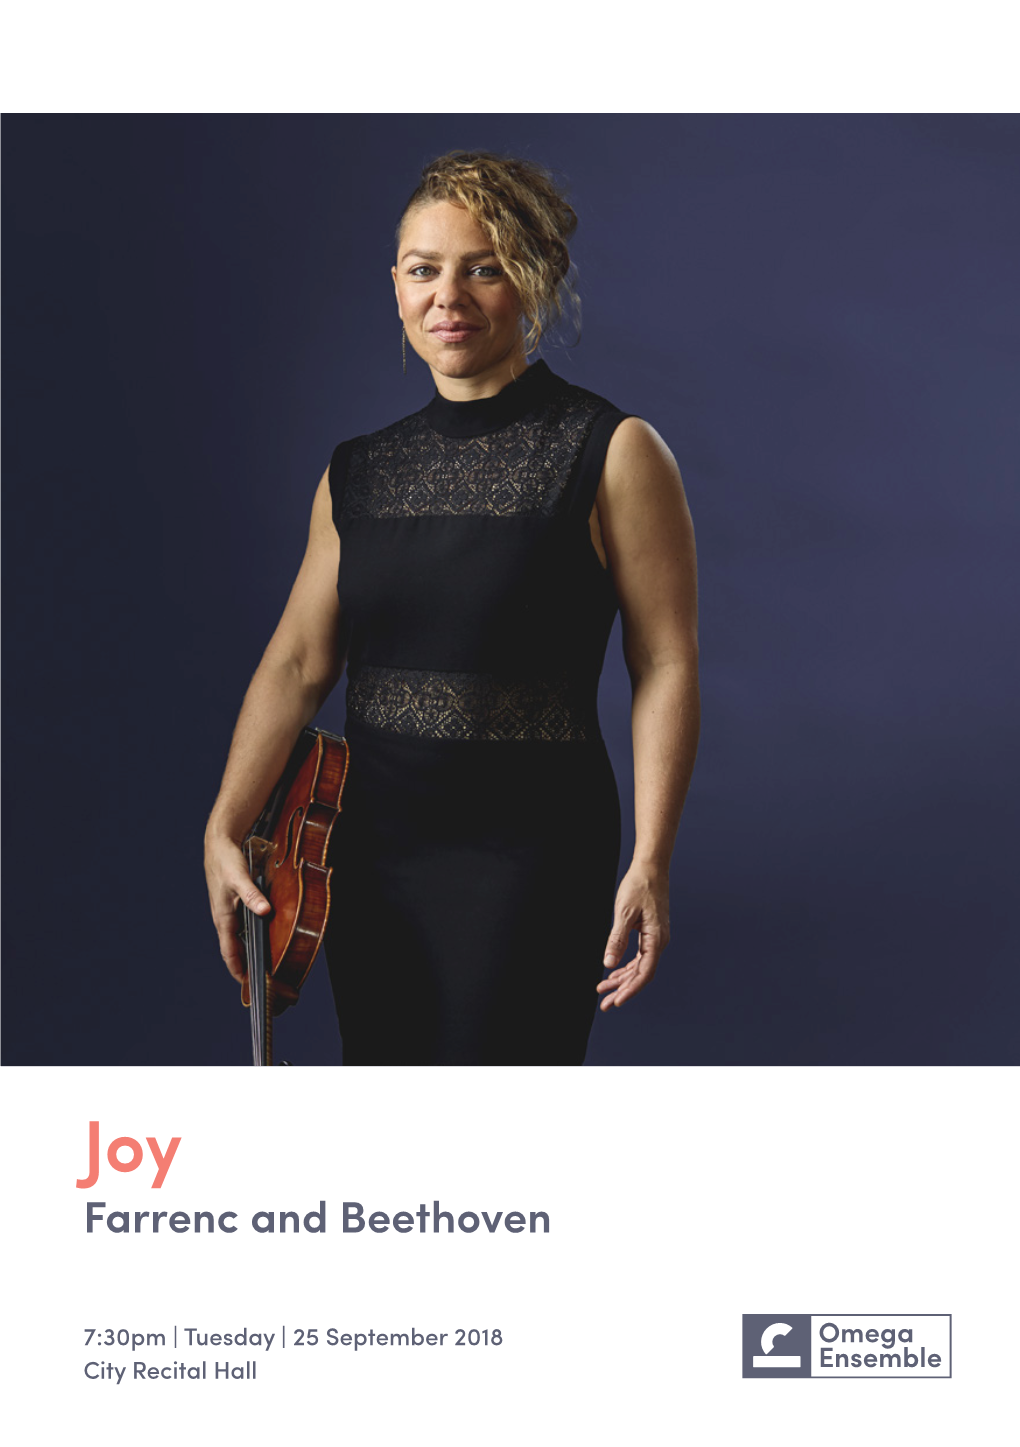 Joy Farrenc and Beethoven